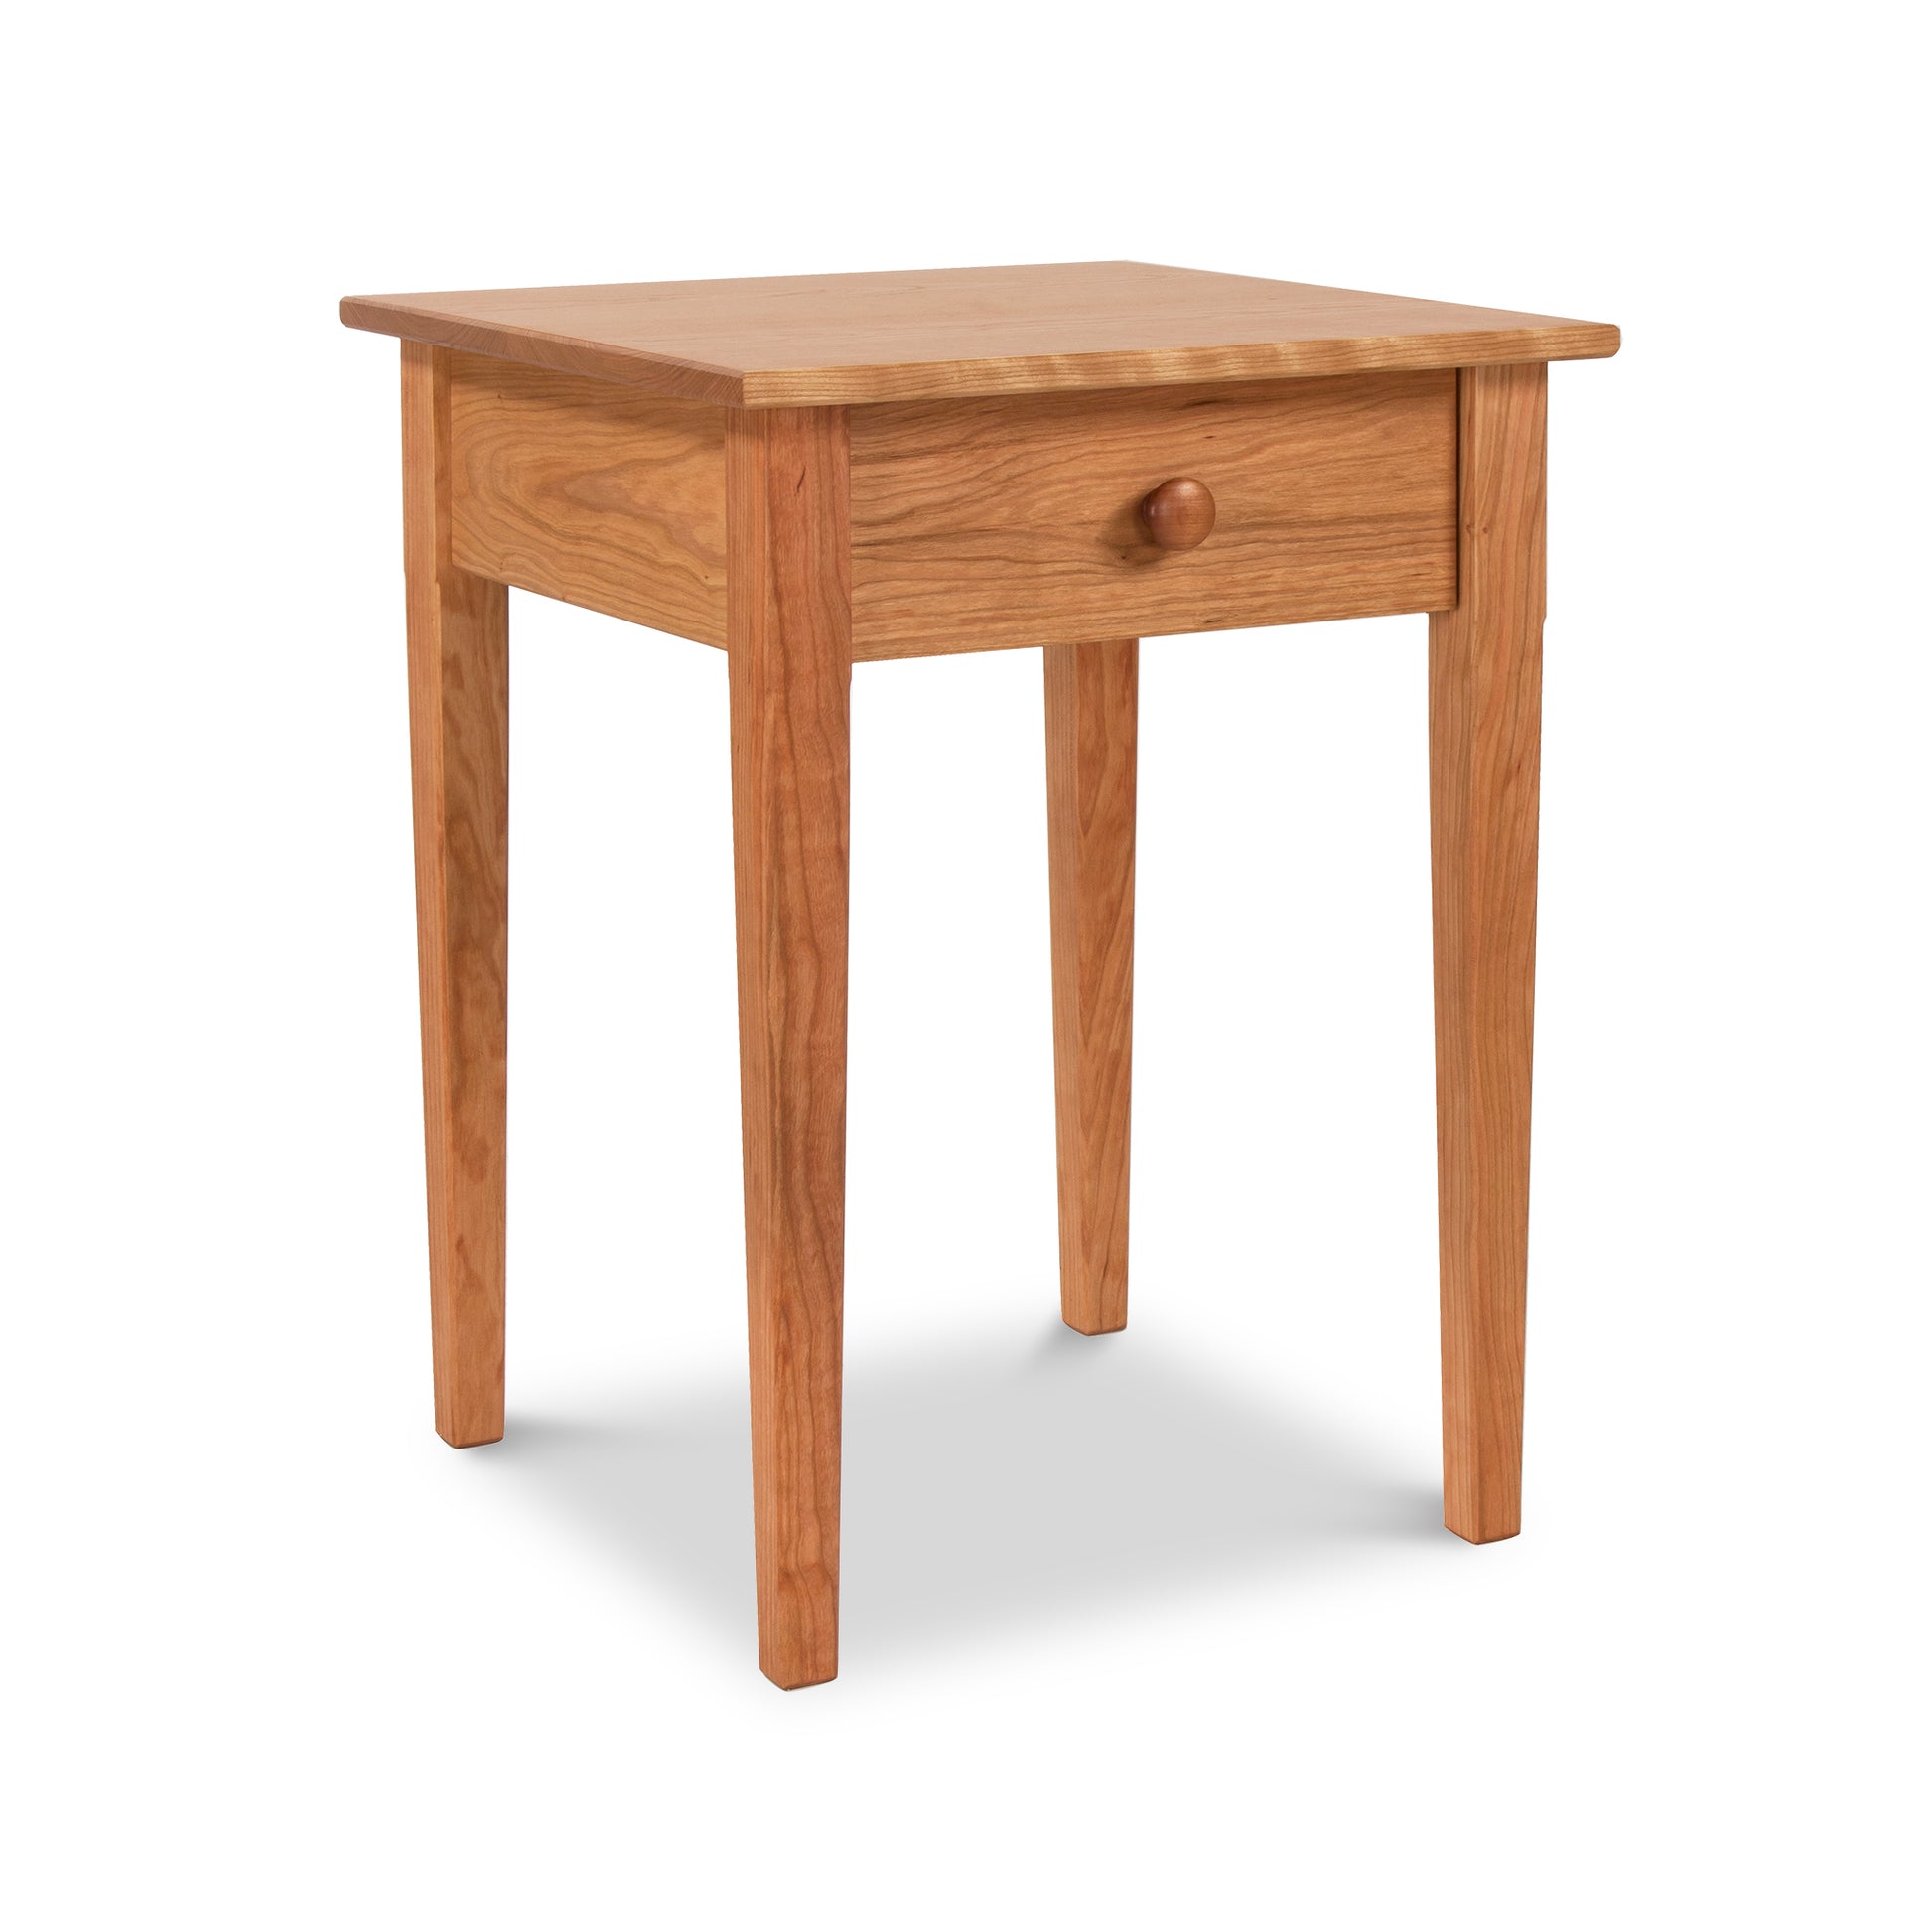 A Vermont Shaker Bedside Table from Maple Corner Woodworks, with a single drawer and a round knob, standing on four slender legs, isolated against a white background.